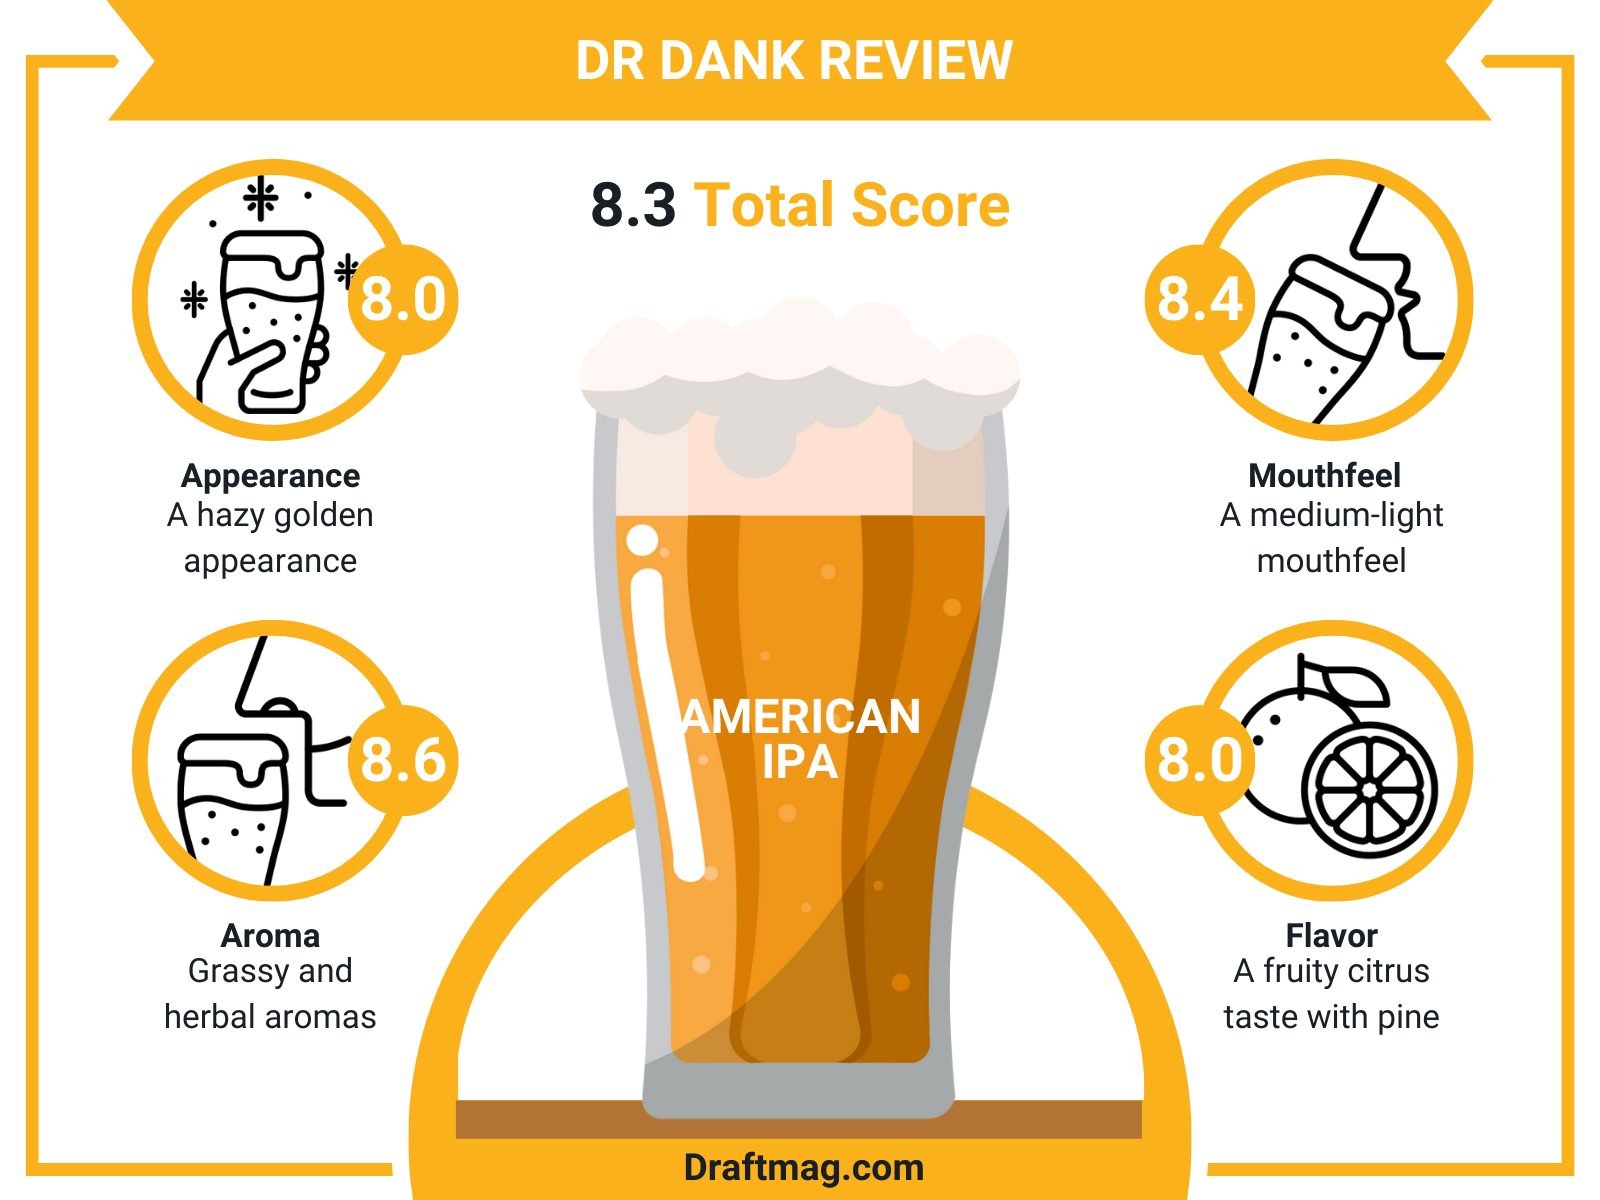 Dr Dank Review Infographic